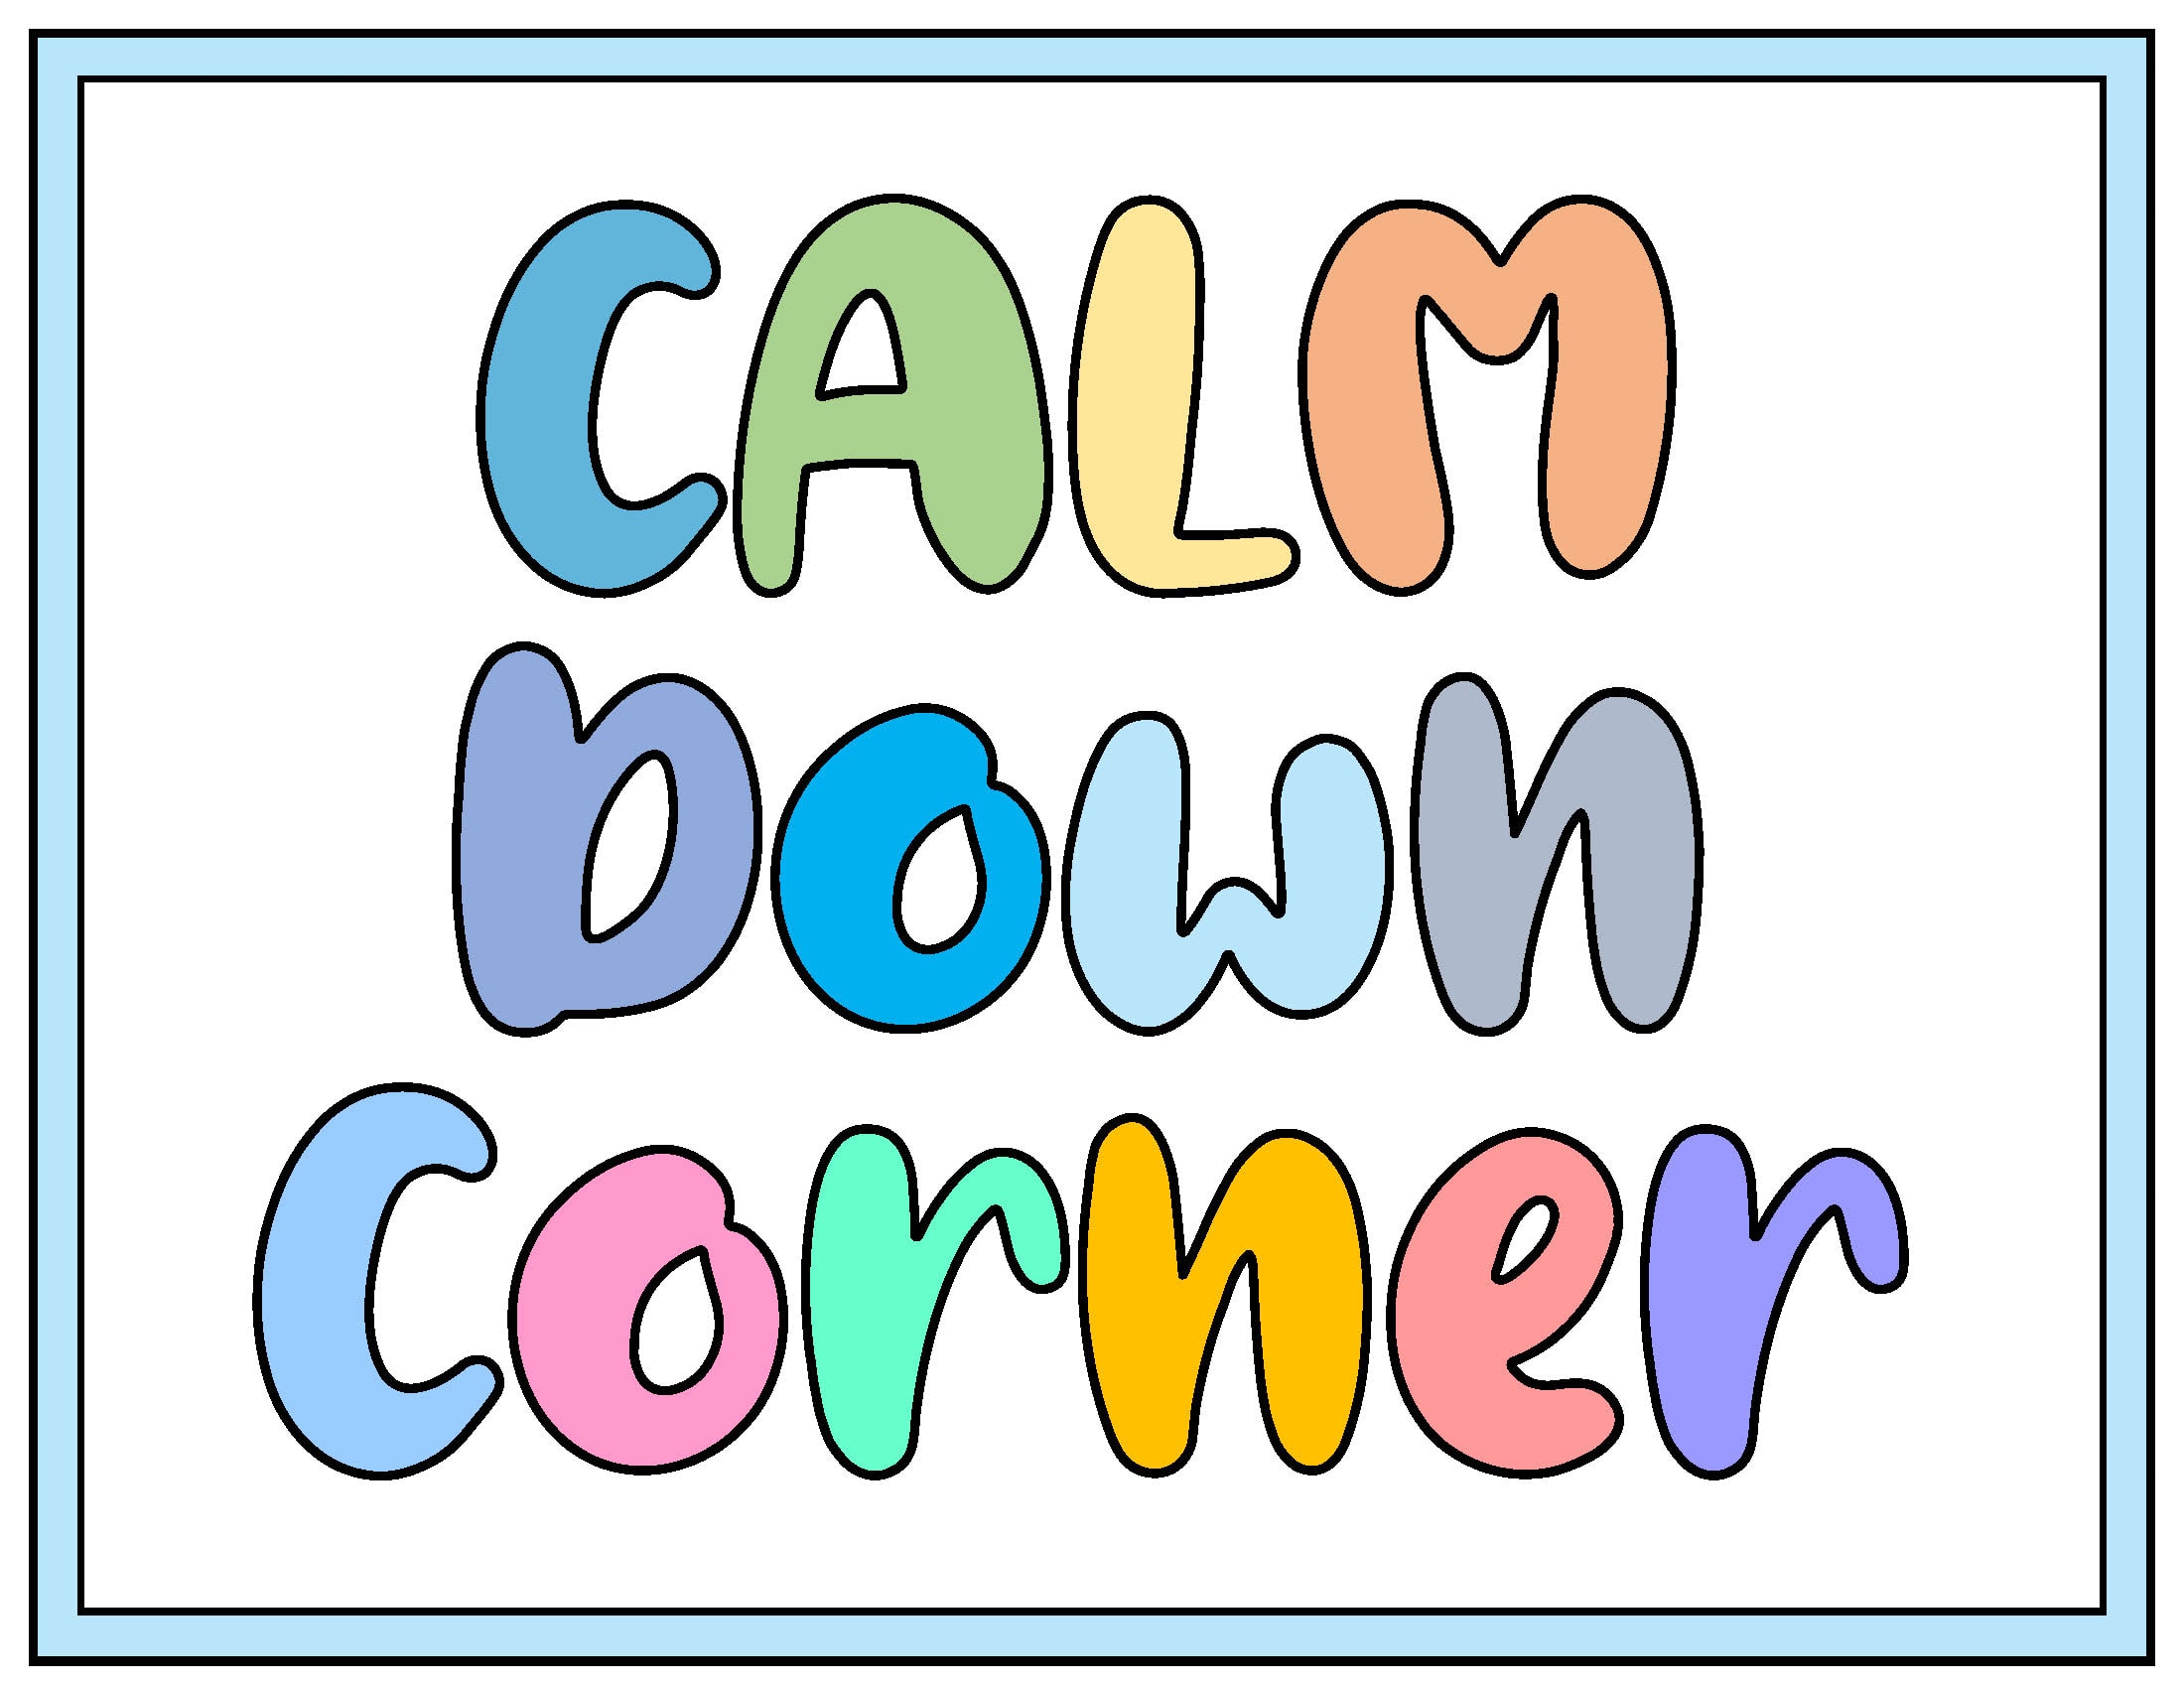 How To Create And Use A Calm Corner FREE Calming Corner Posters